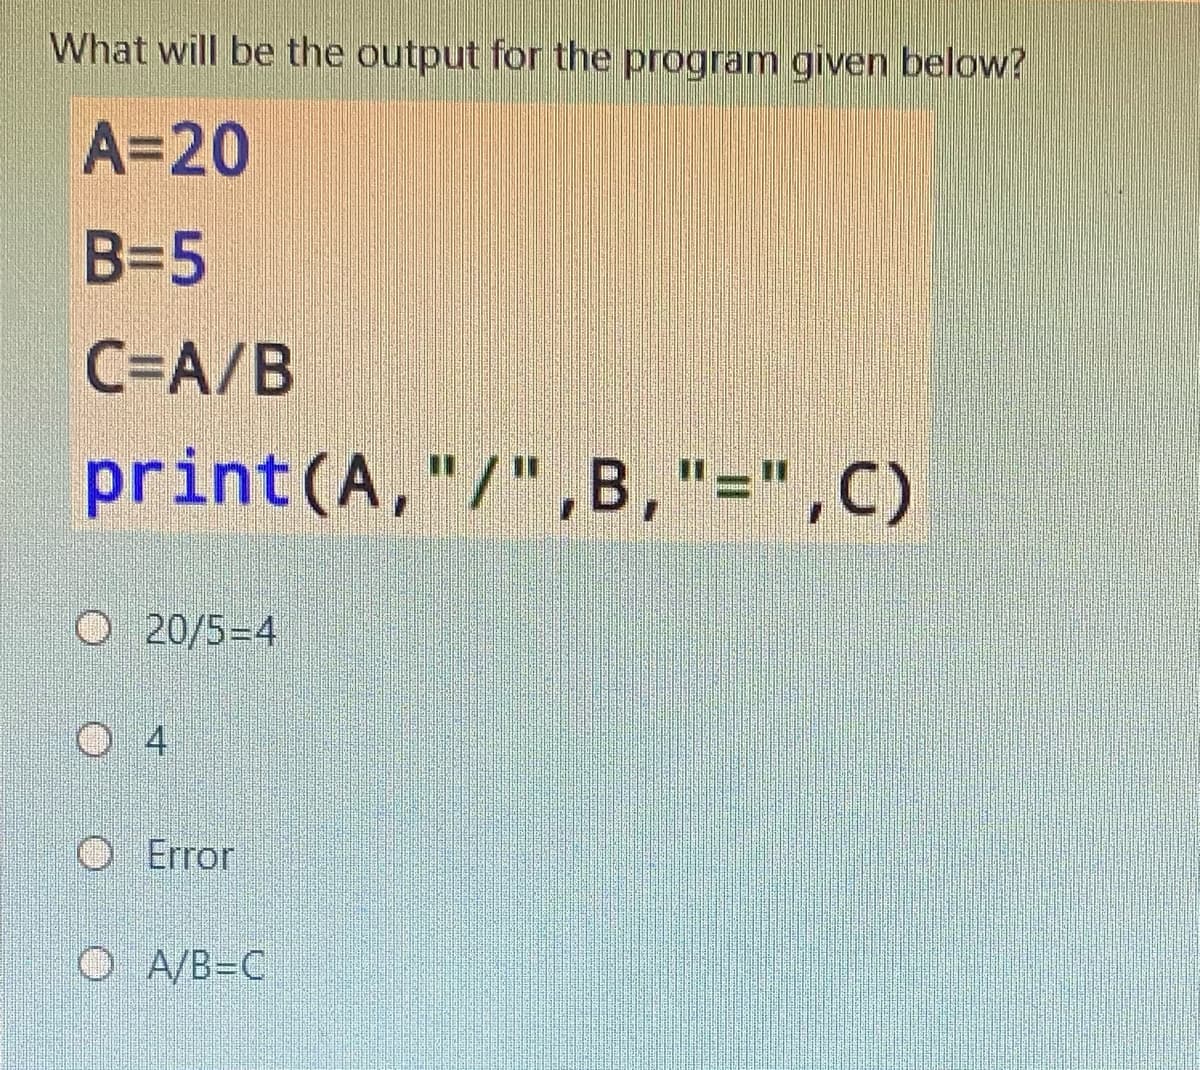 What will be the output for the programn given below?
A=20
B=5
C=A/B
print (A,"/",B,"=",C)
O 20/5=4
O 4
O Error
O A/B=C
